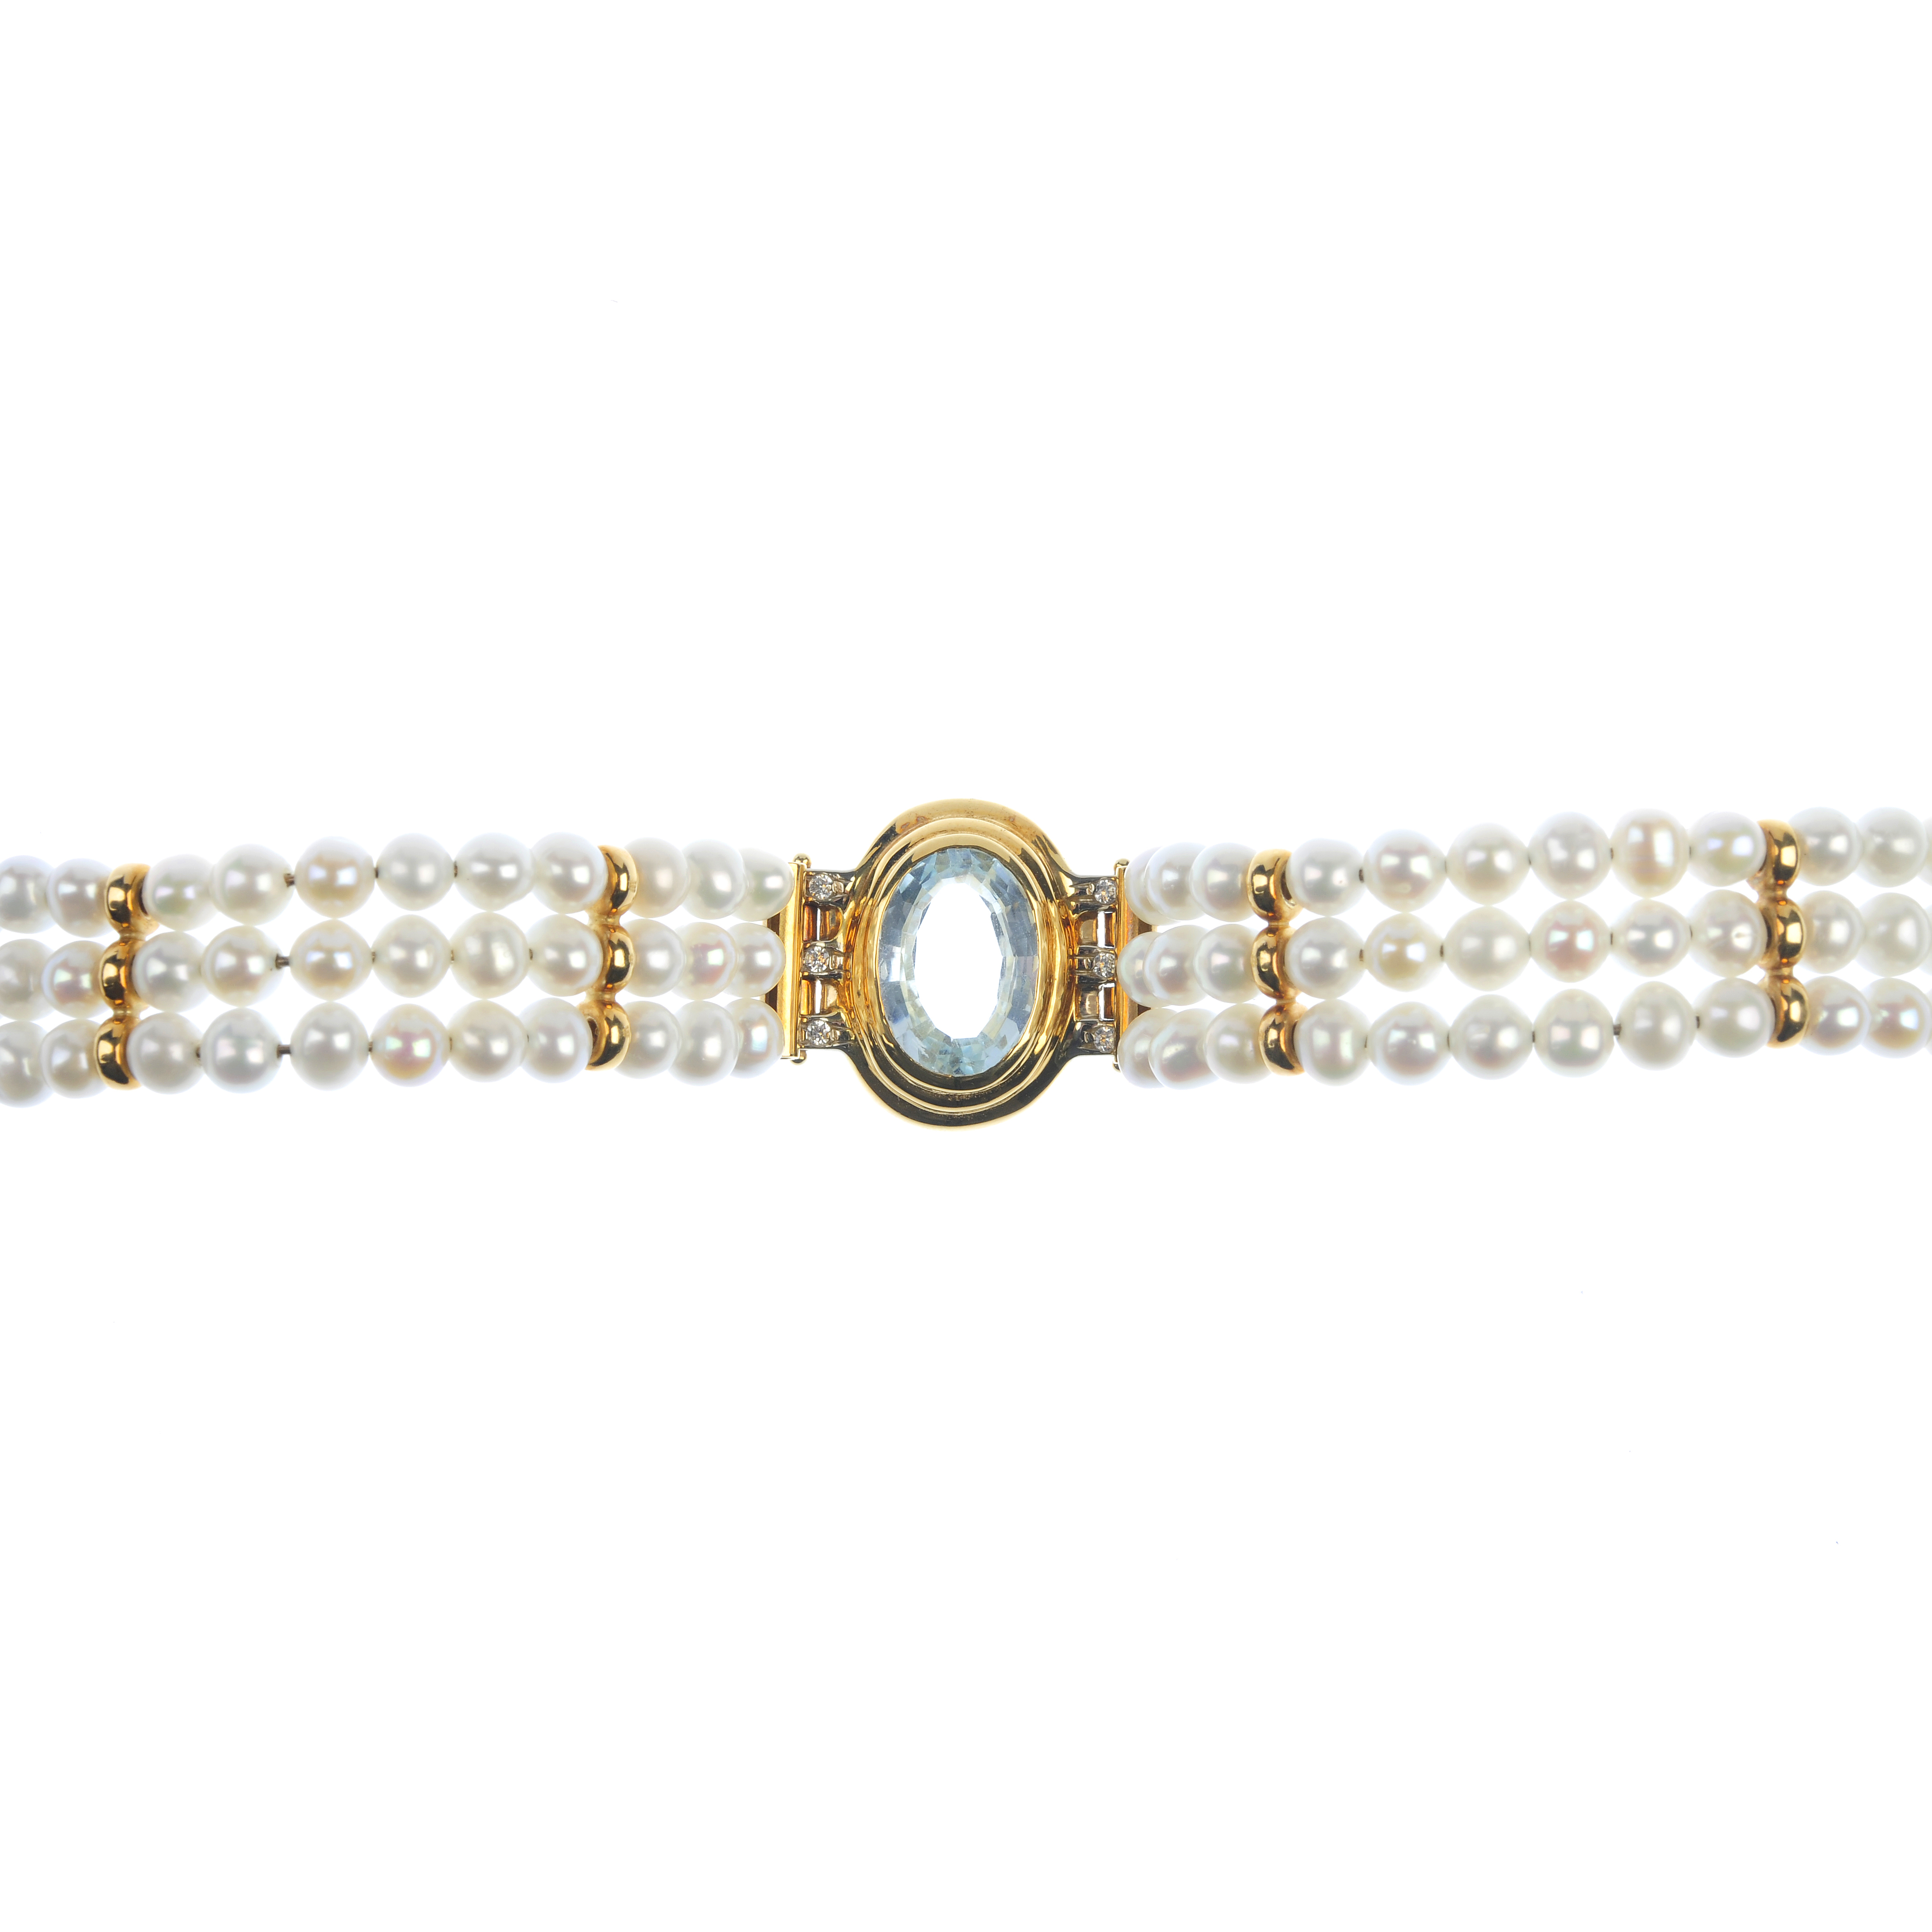 A topaz, diamond and cultured pearl bracelet. The oval-shape blue topaz, within a grooved surround